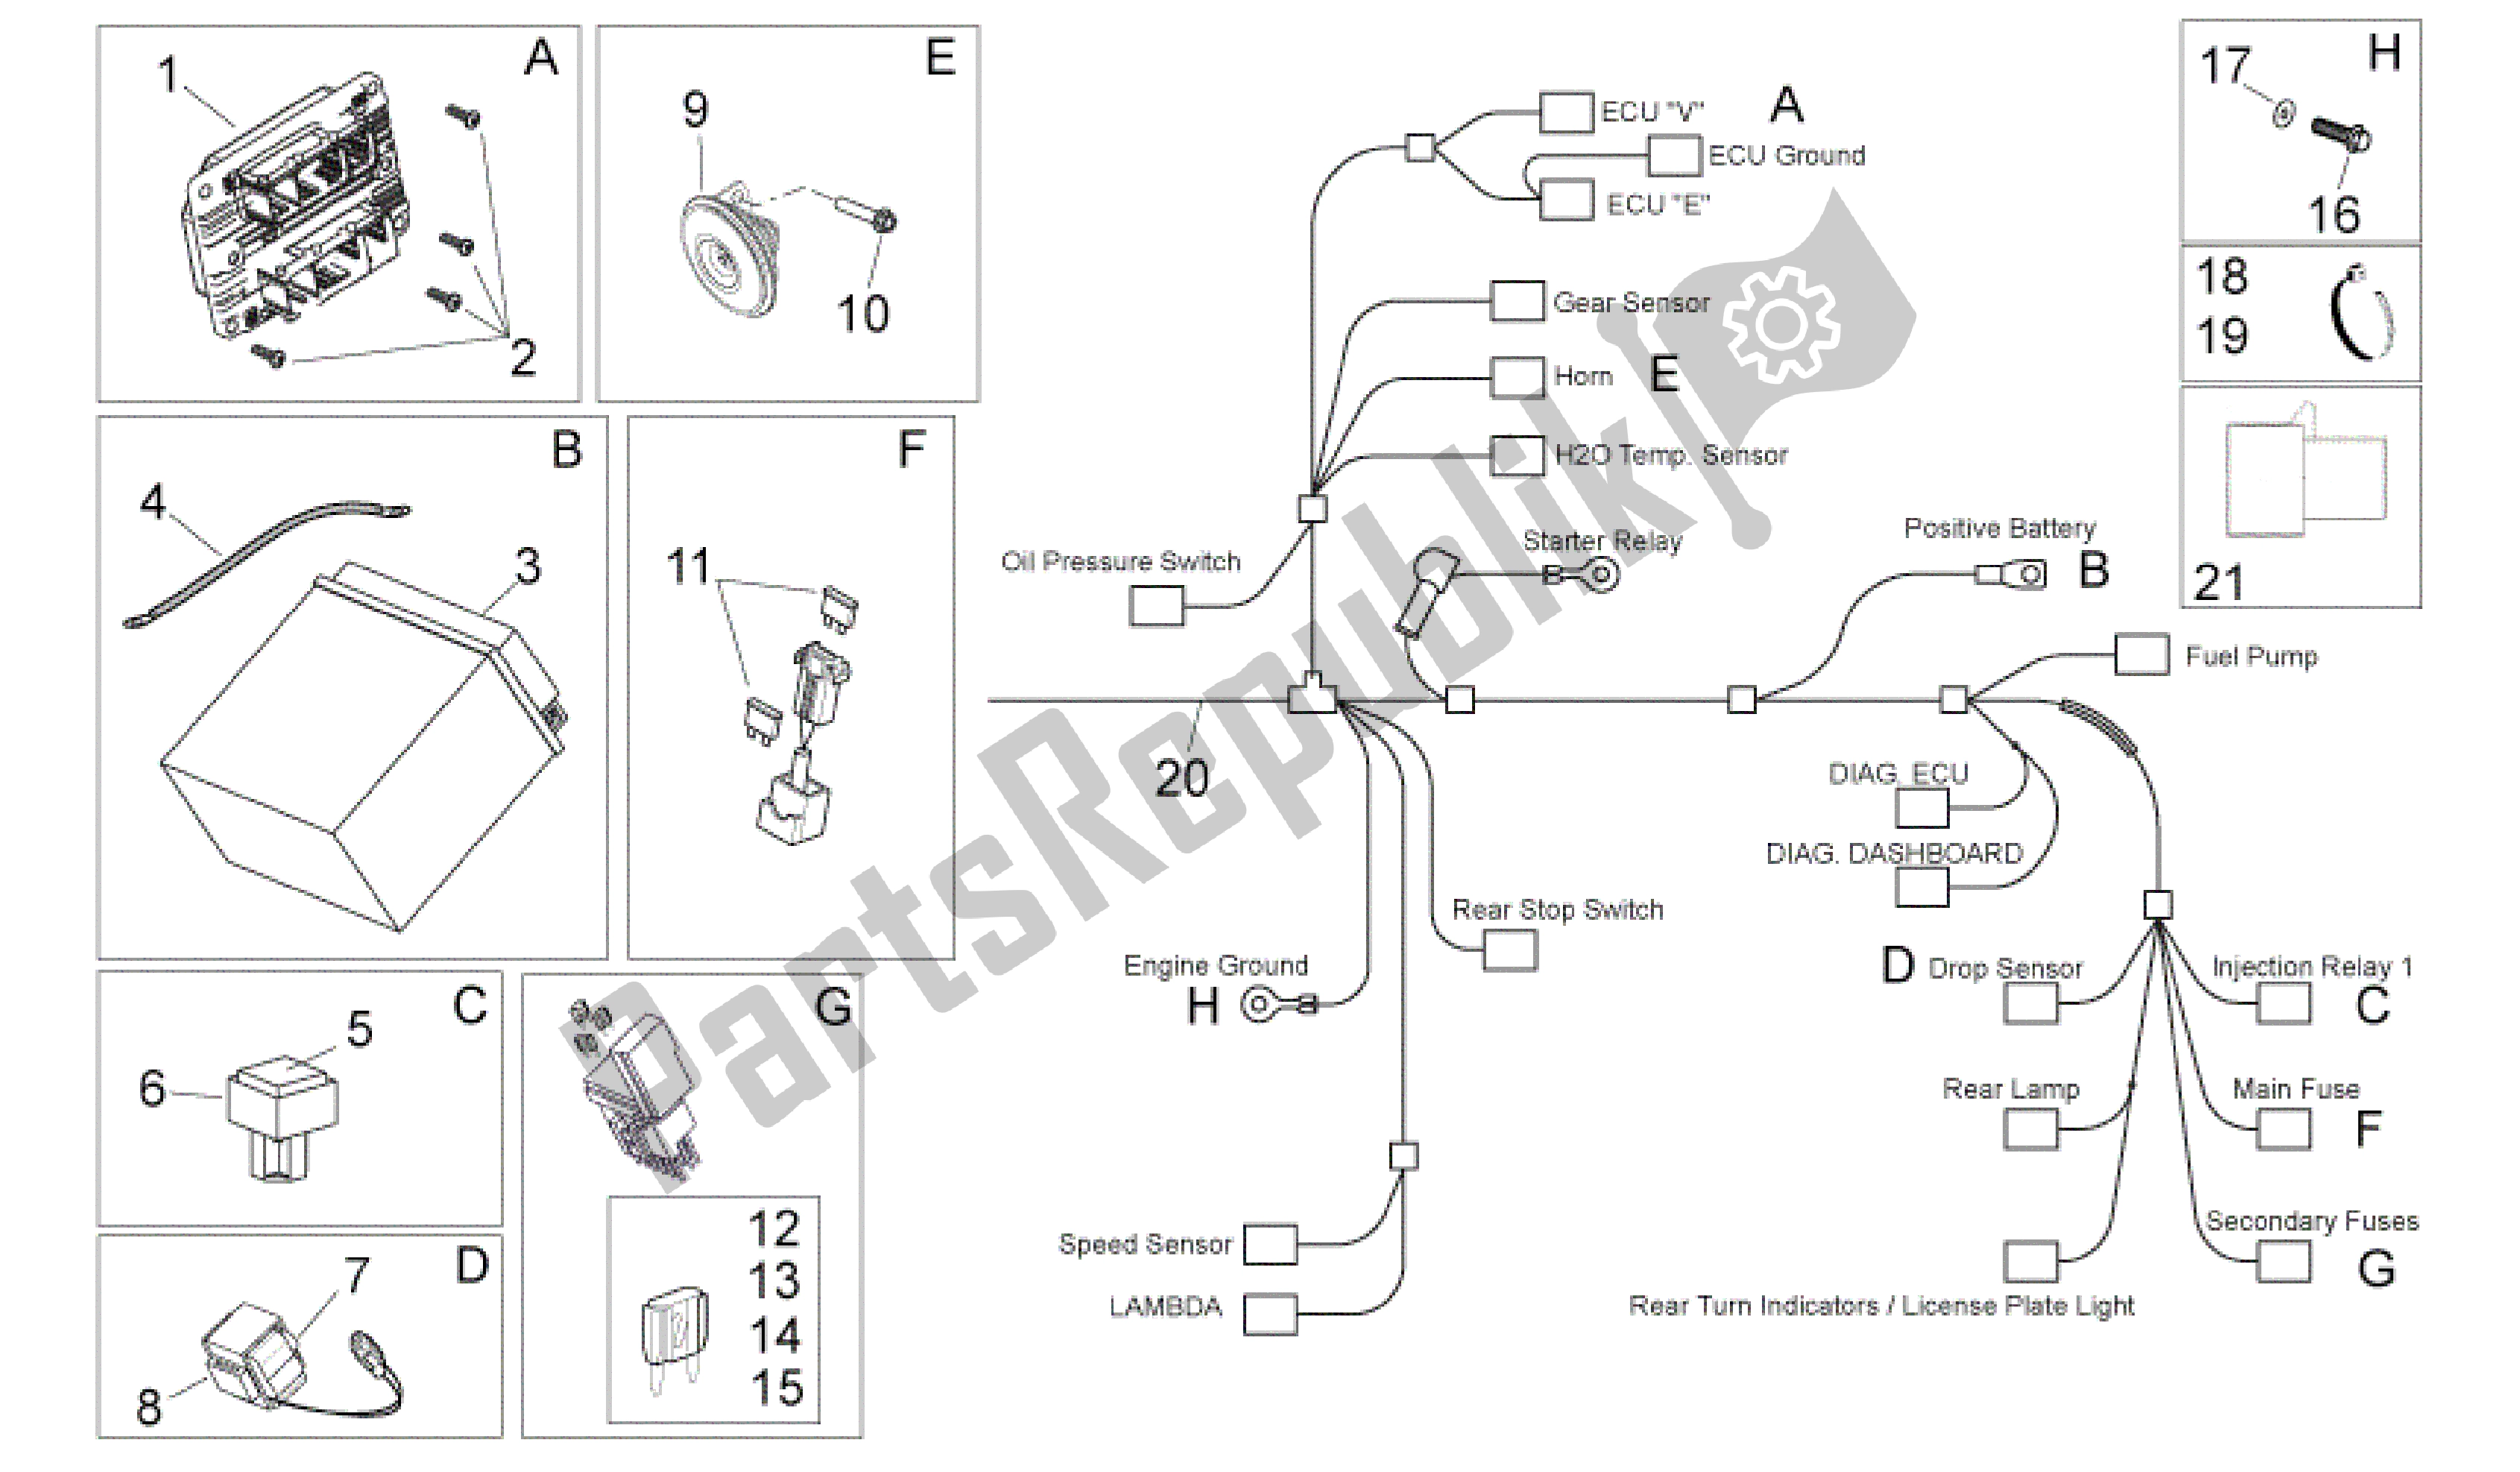 All parts for the Electrical System Ii of the Aprilia Shiver 750 2009